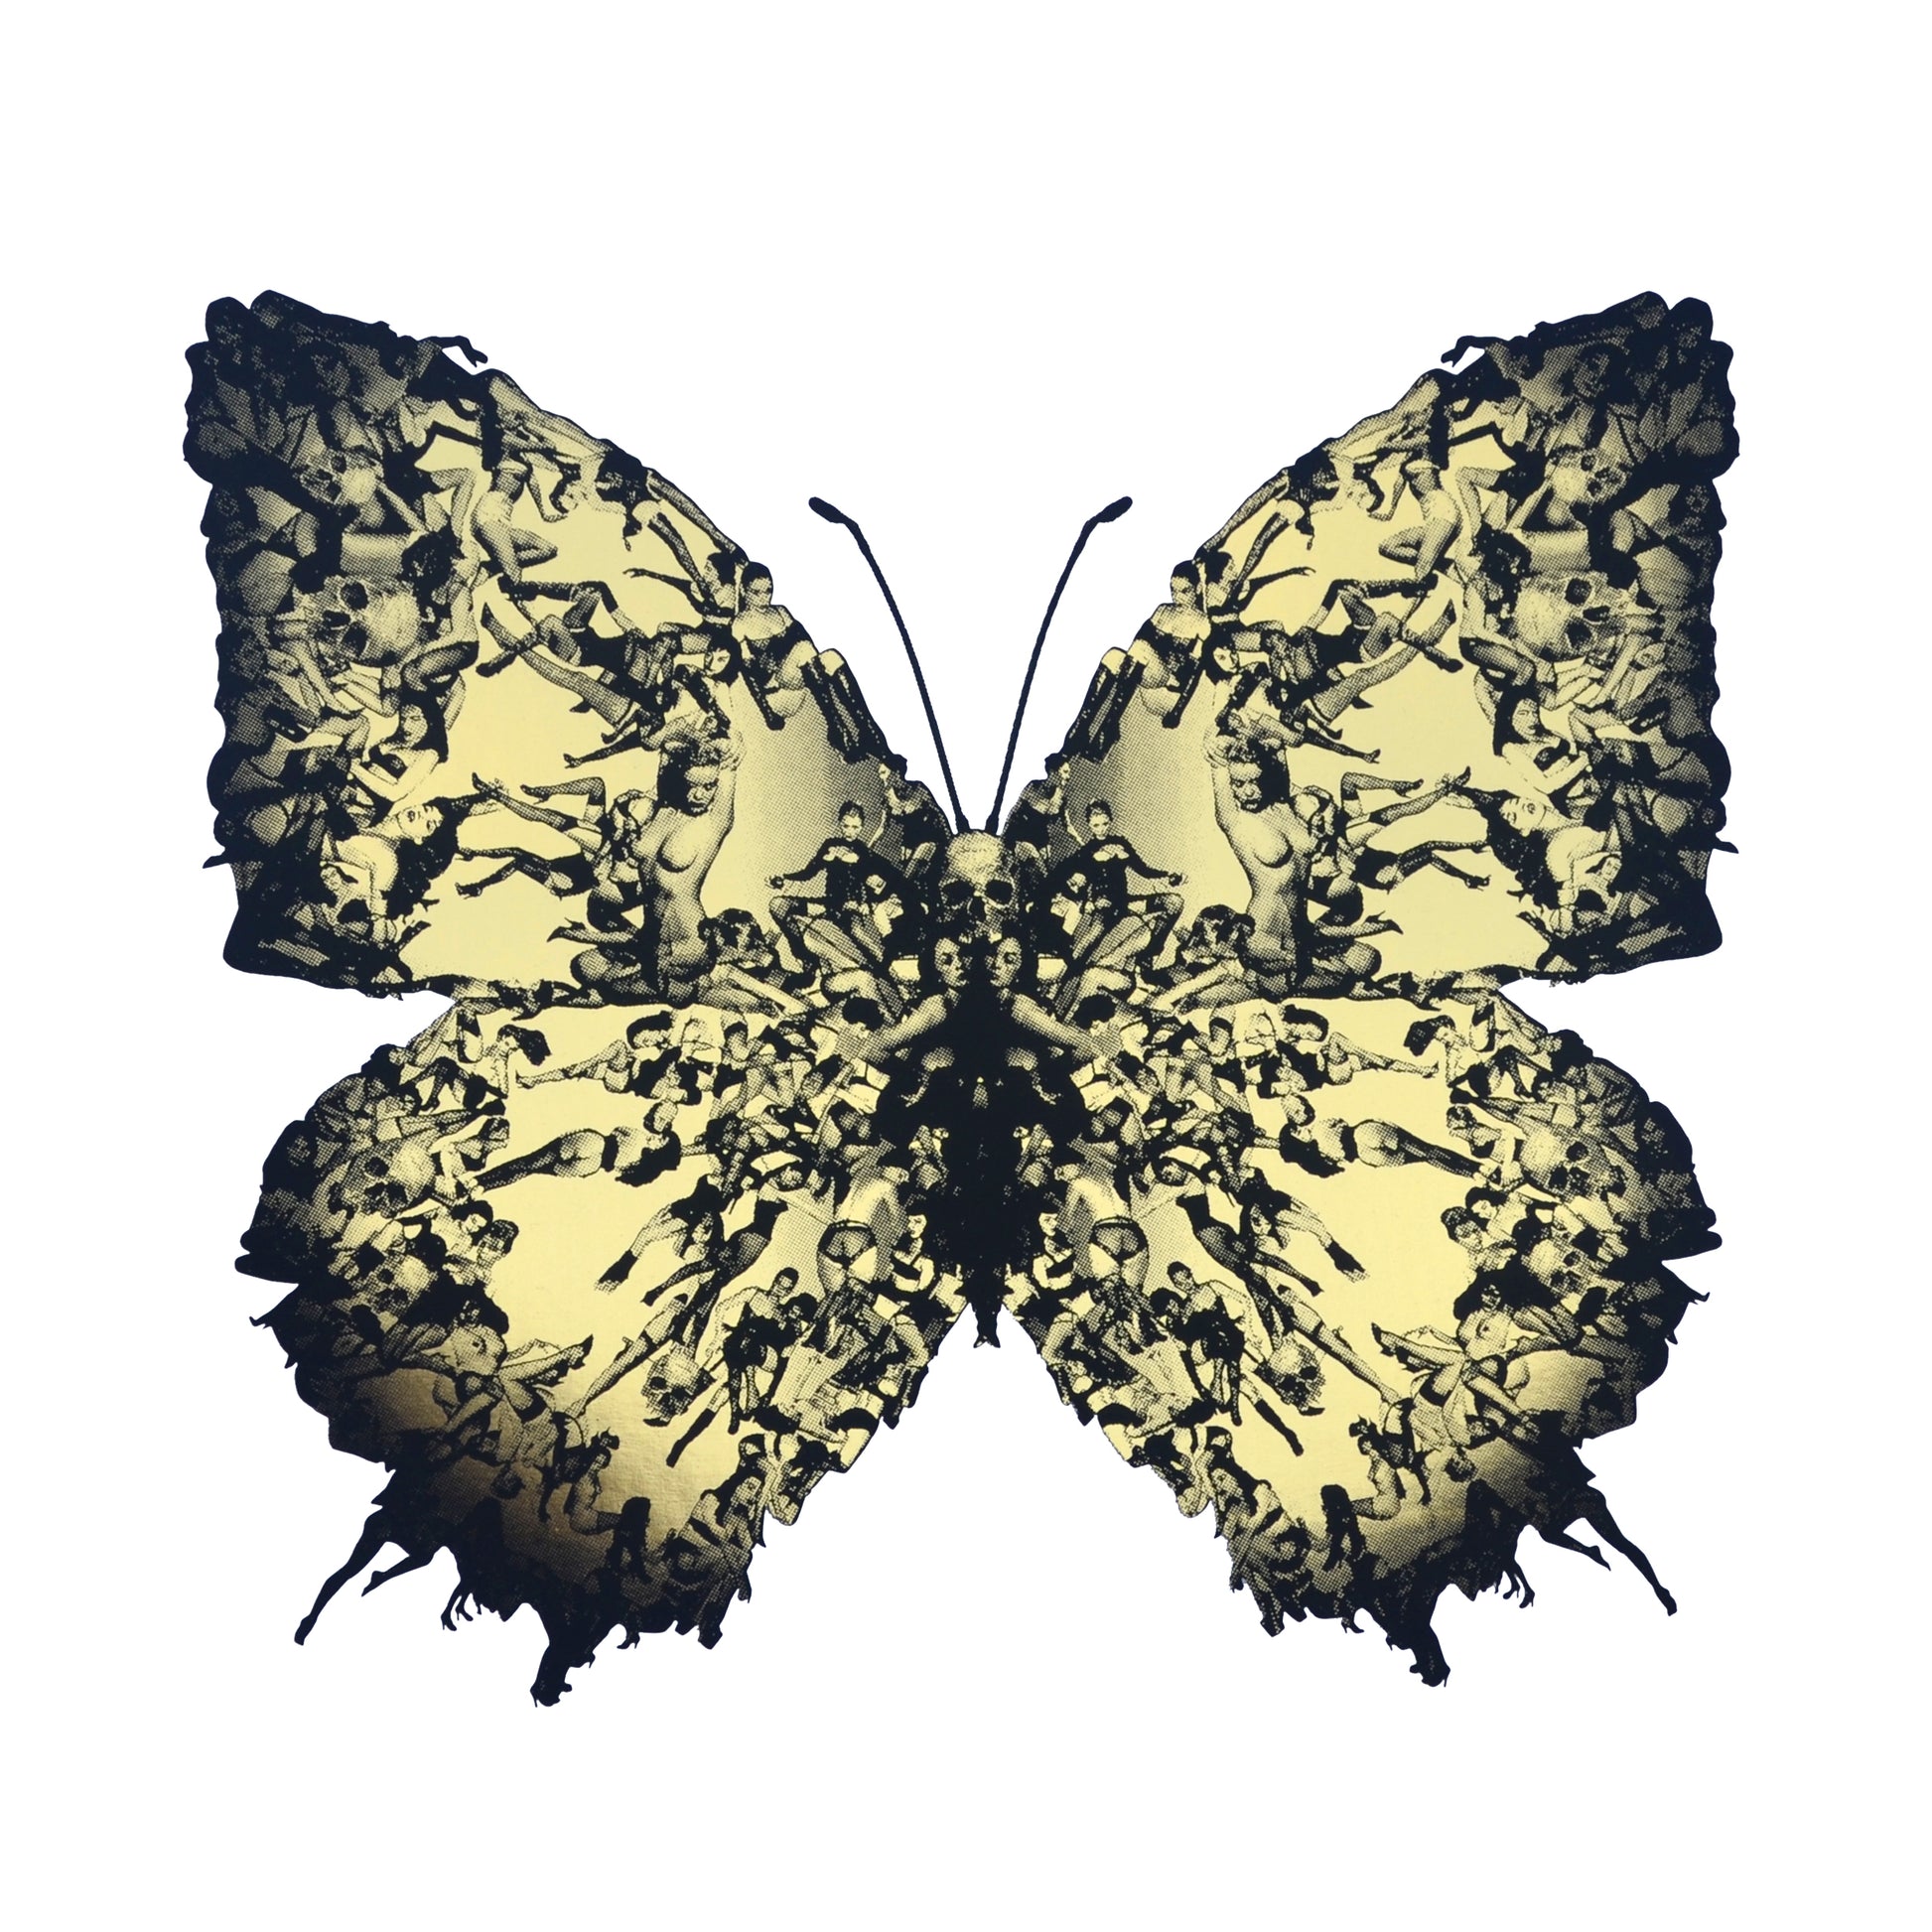 Cassandra-Yap-TAP-Galleries-Mini-Gold-Foil-Limited-Edition-Butterfly-Black